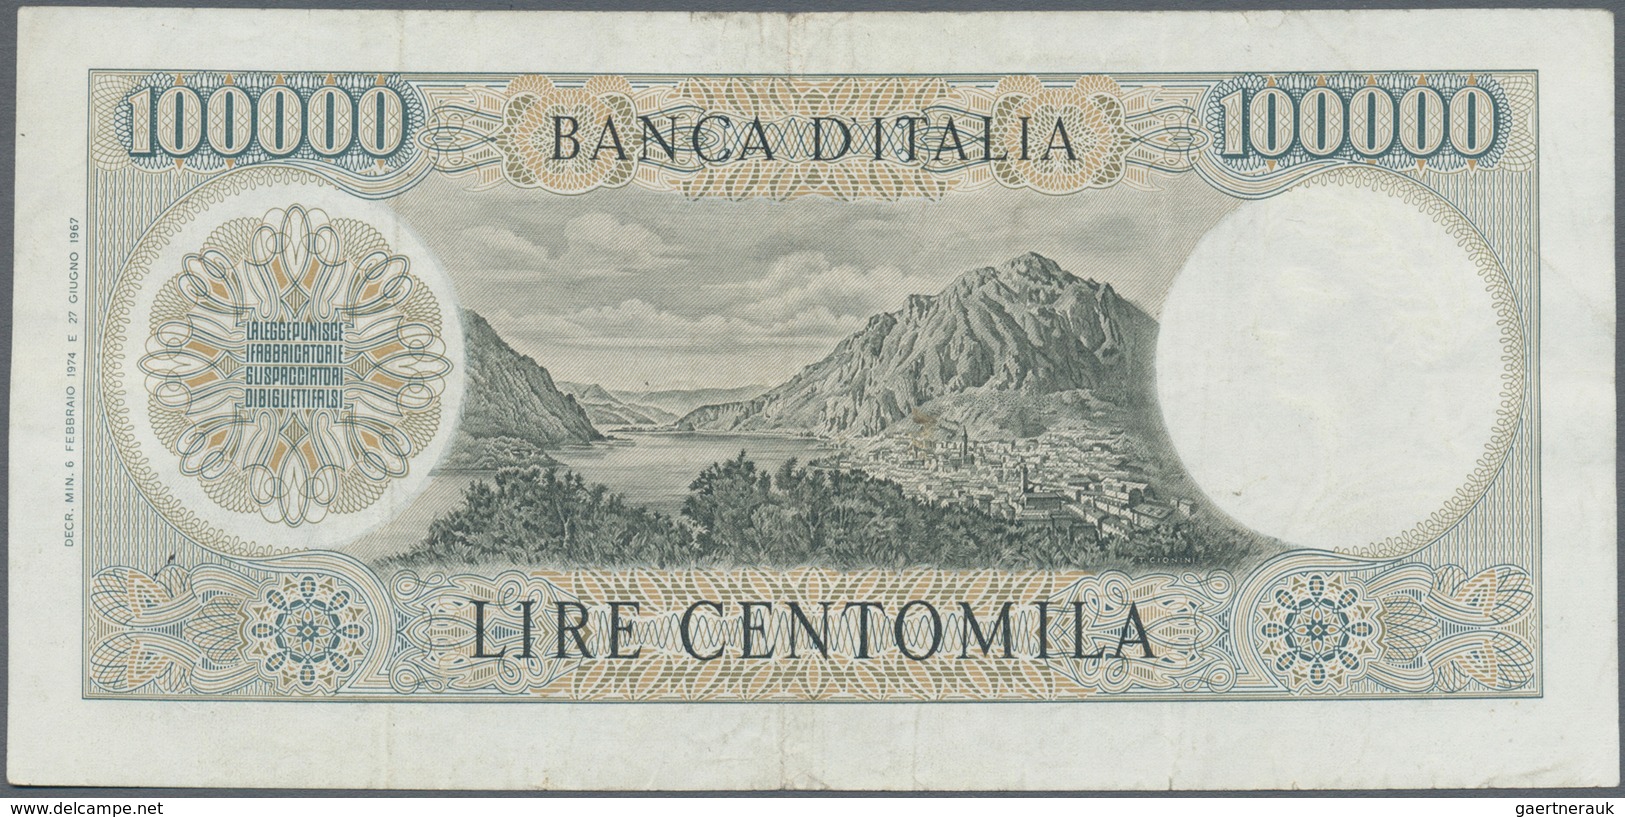 Italy / Italien: 100.000 Lire 1974 P. 100c Manzoni, S/N D122784F, Several Folds In Paper, Pressed, M - Andere & Zonder Classificatie